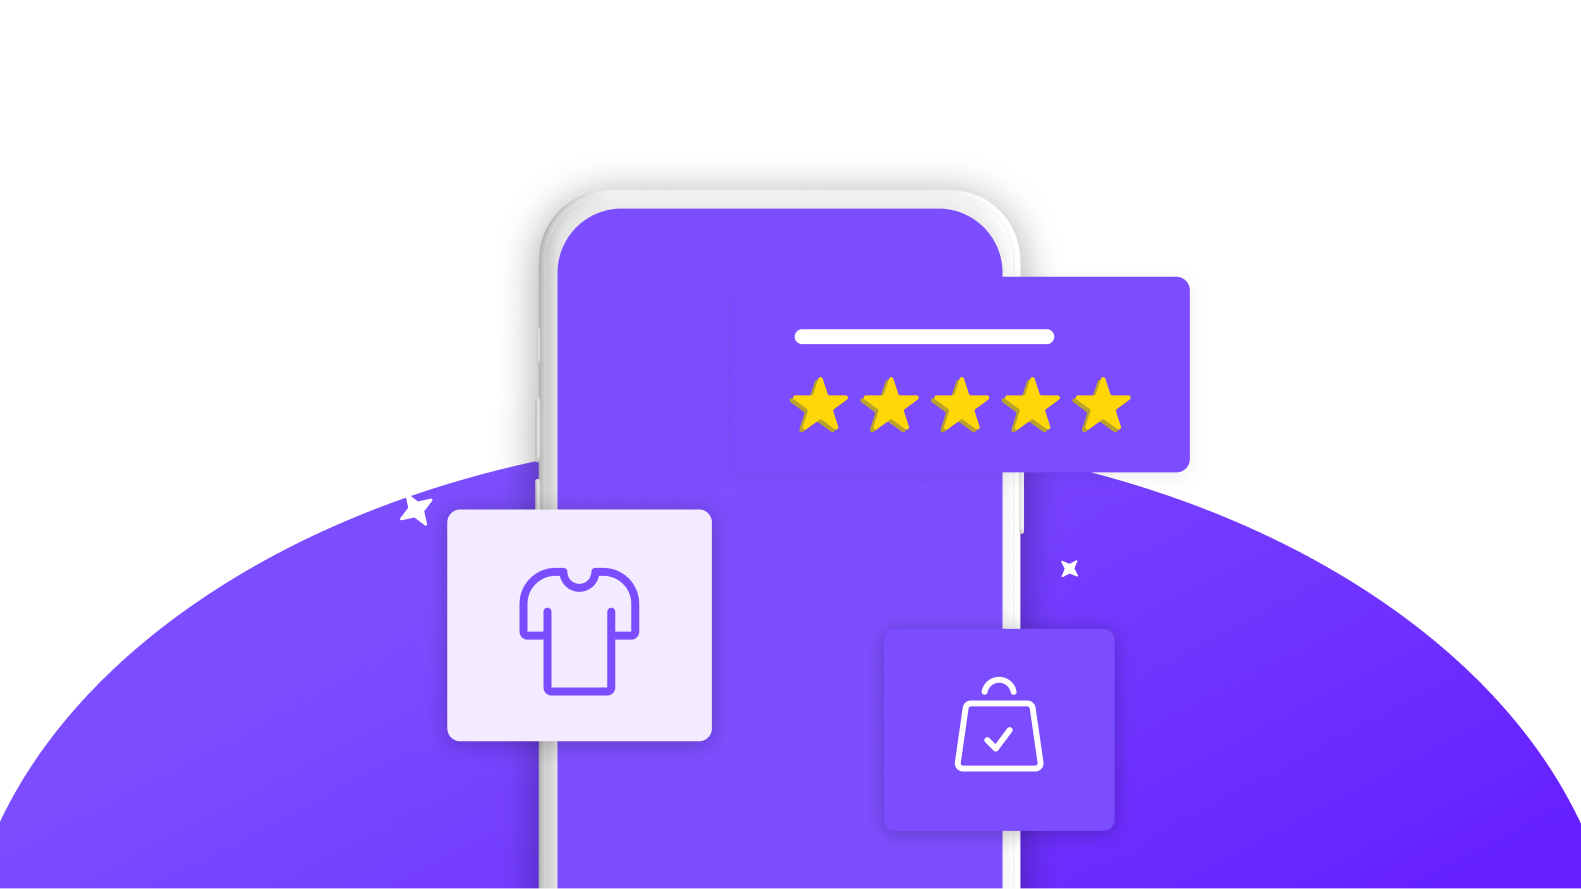 An illustration of an e-commerce app displays a mobile phone frame featuring products, a shopping bag icon, and a five-star rating, indicating user satisfaction and quality assessment.